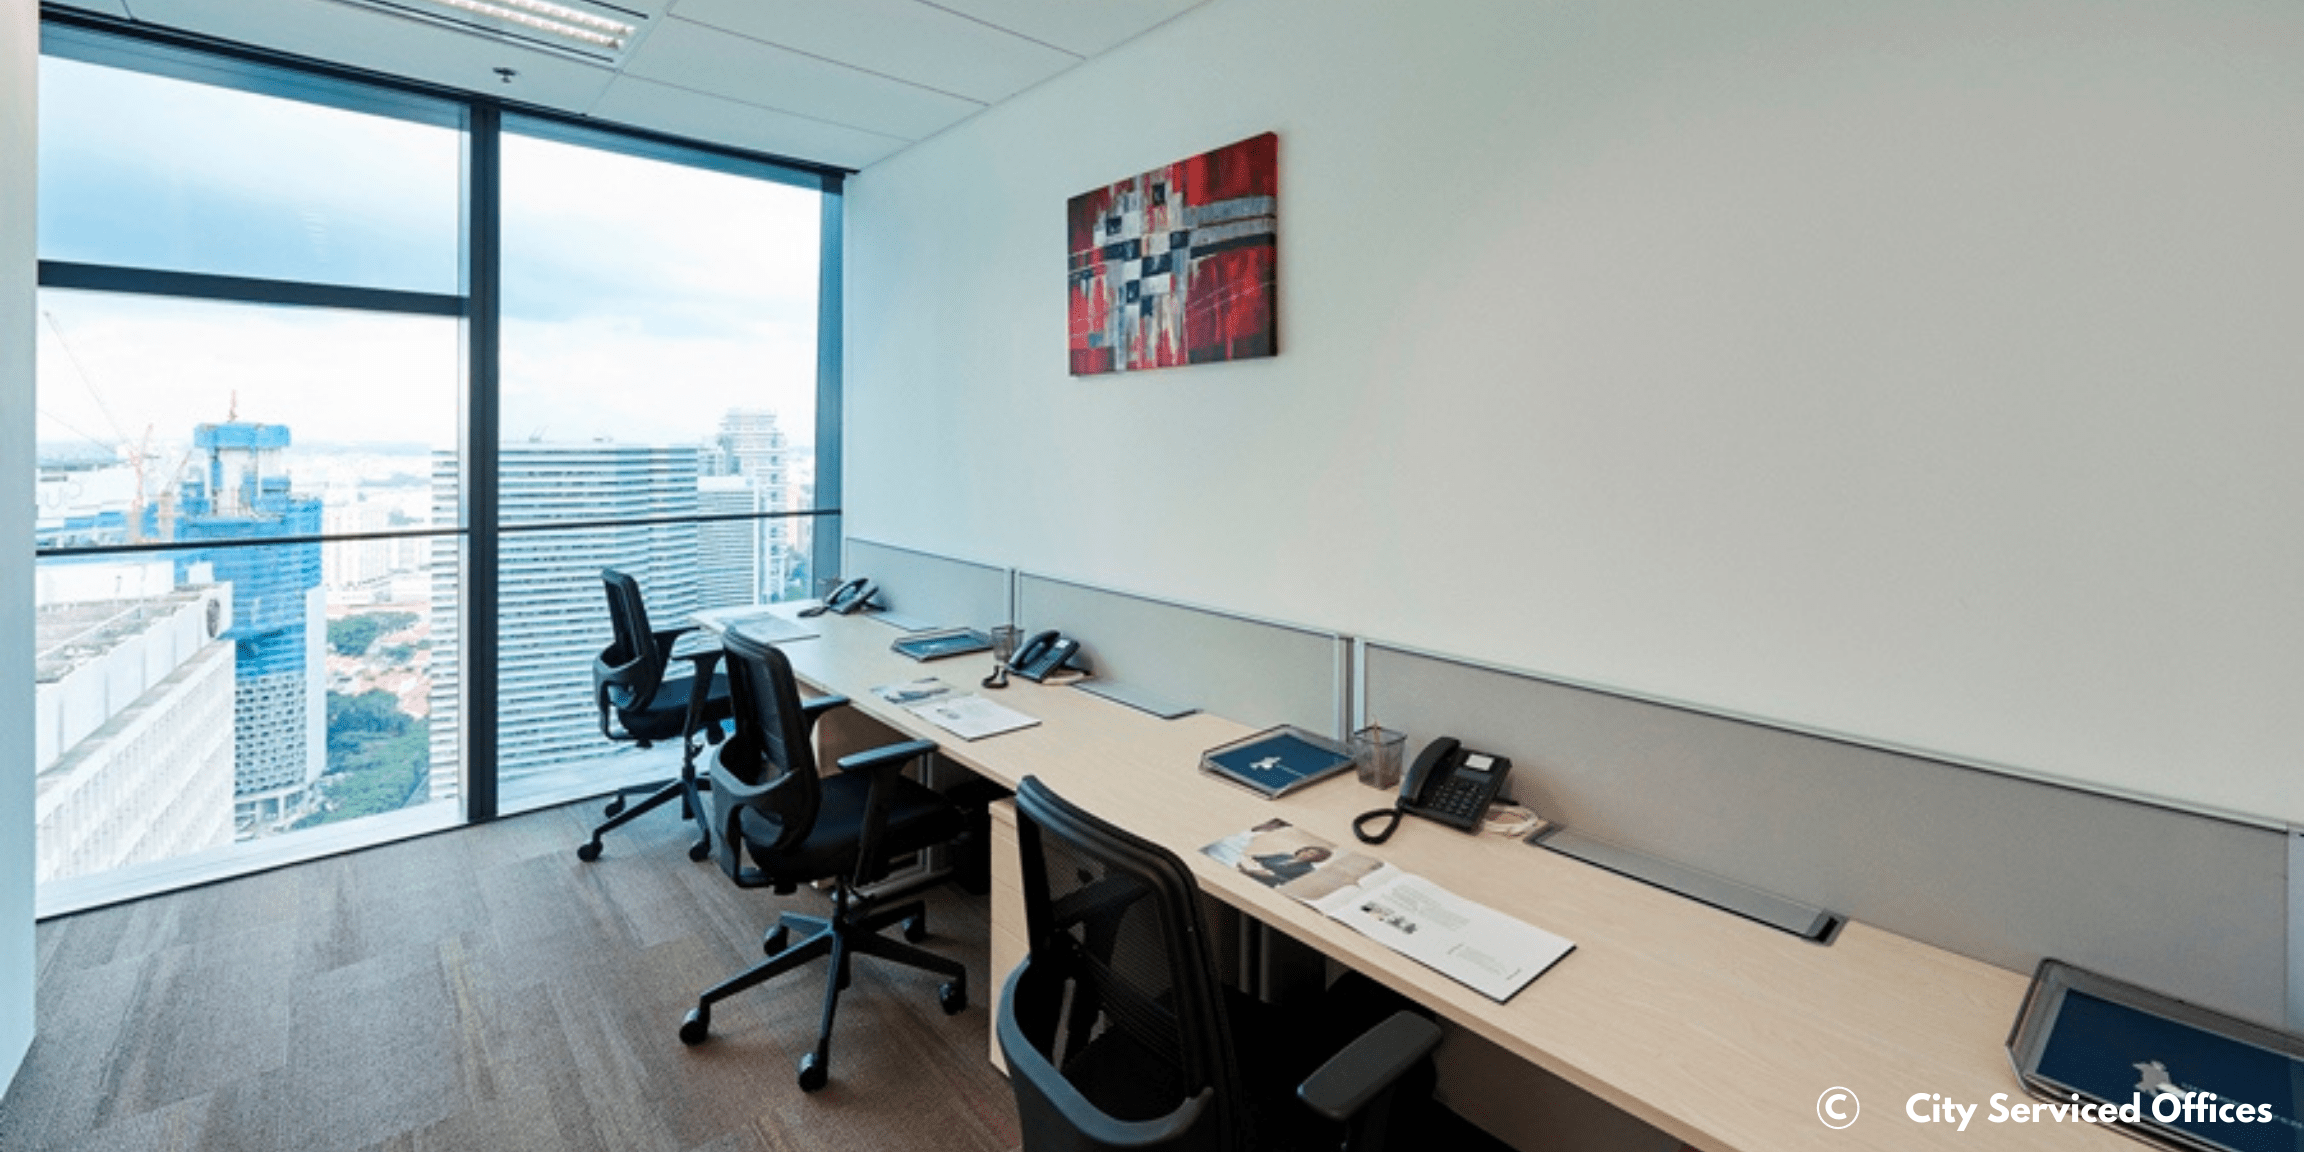 City Serviced Offices